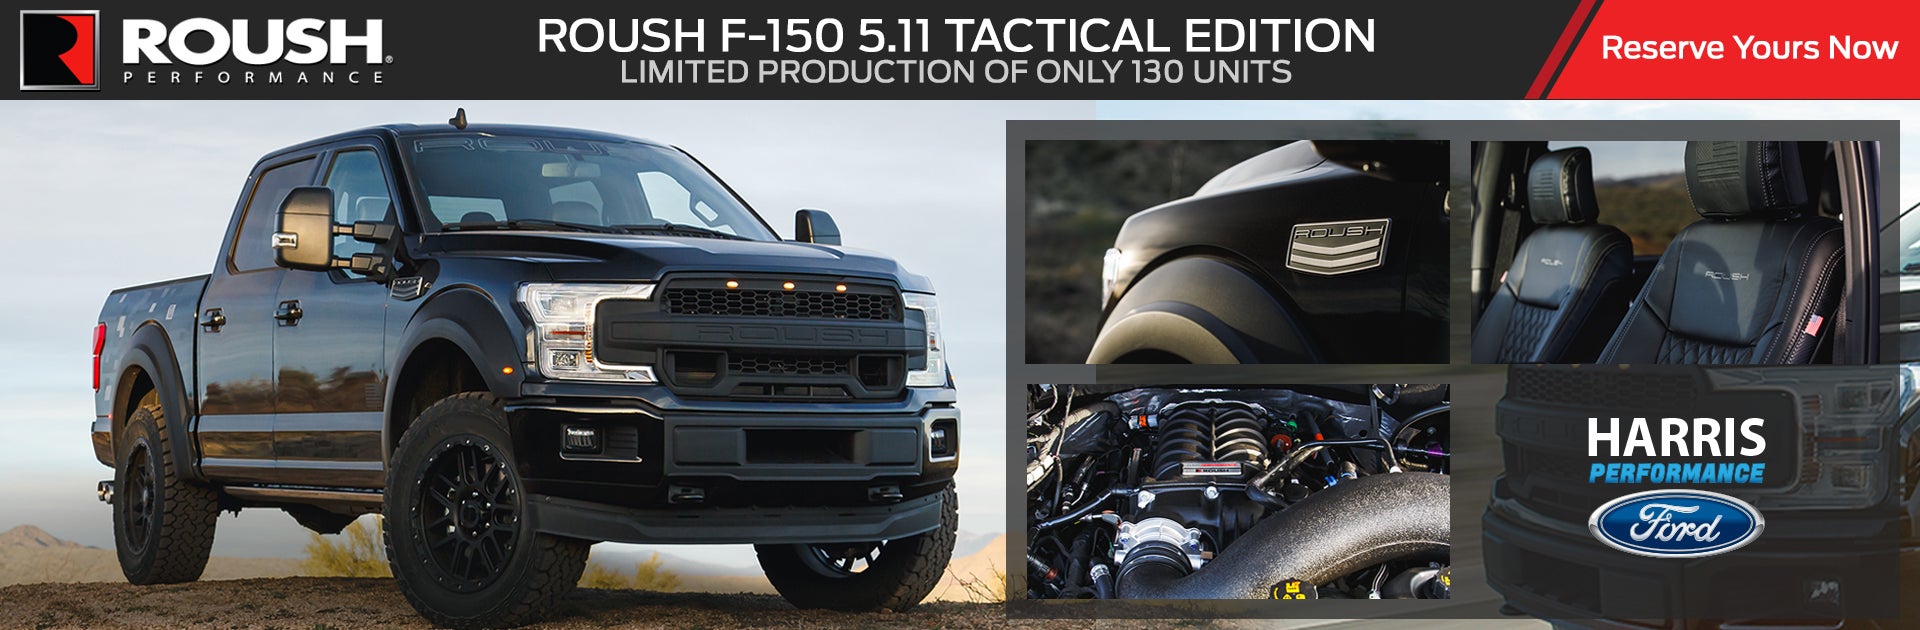 Check Out The ROUSH Ford F-150 5.11 Tactical Edition